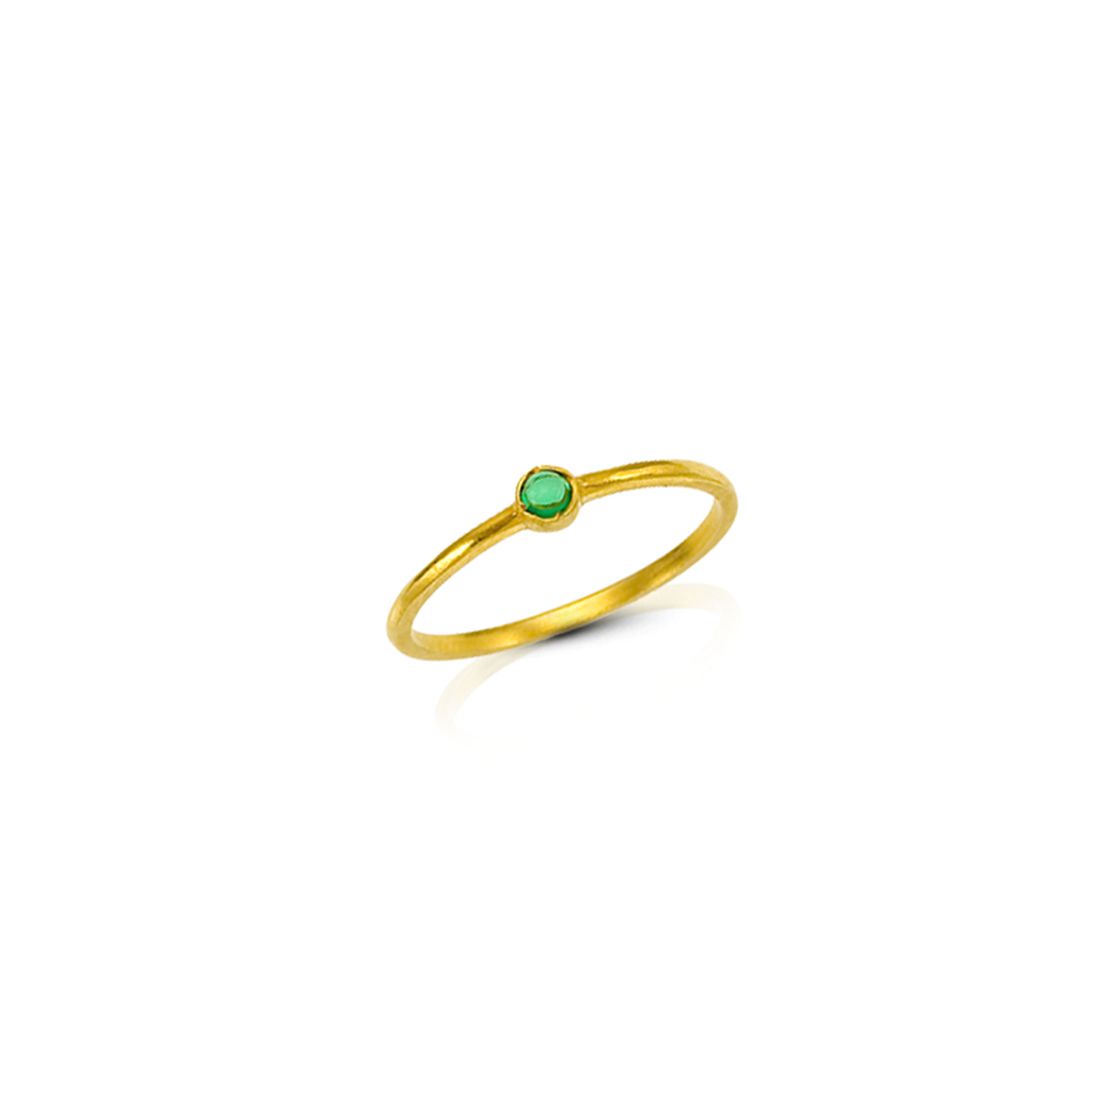 Simple gold band with green zircon stone.